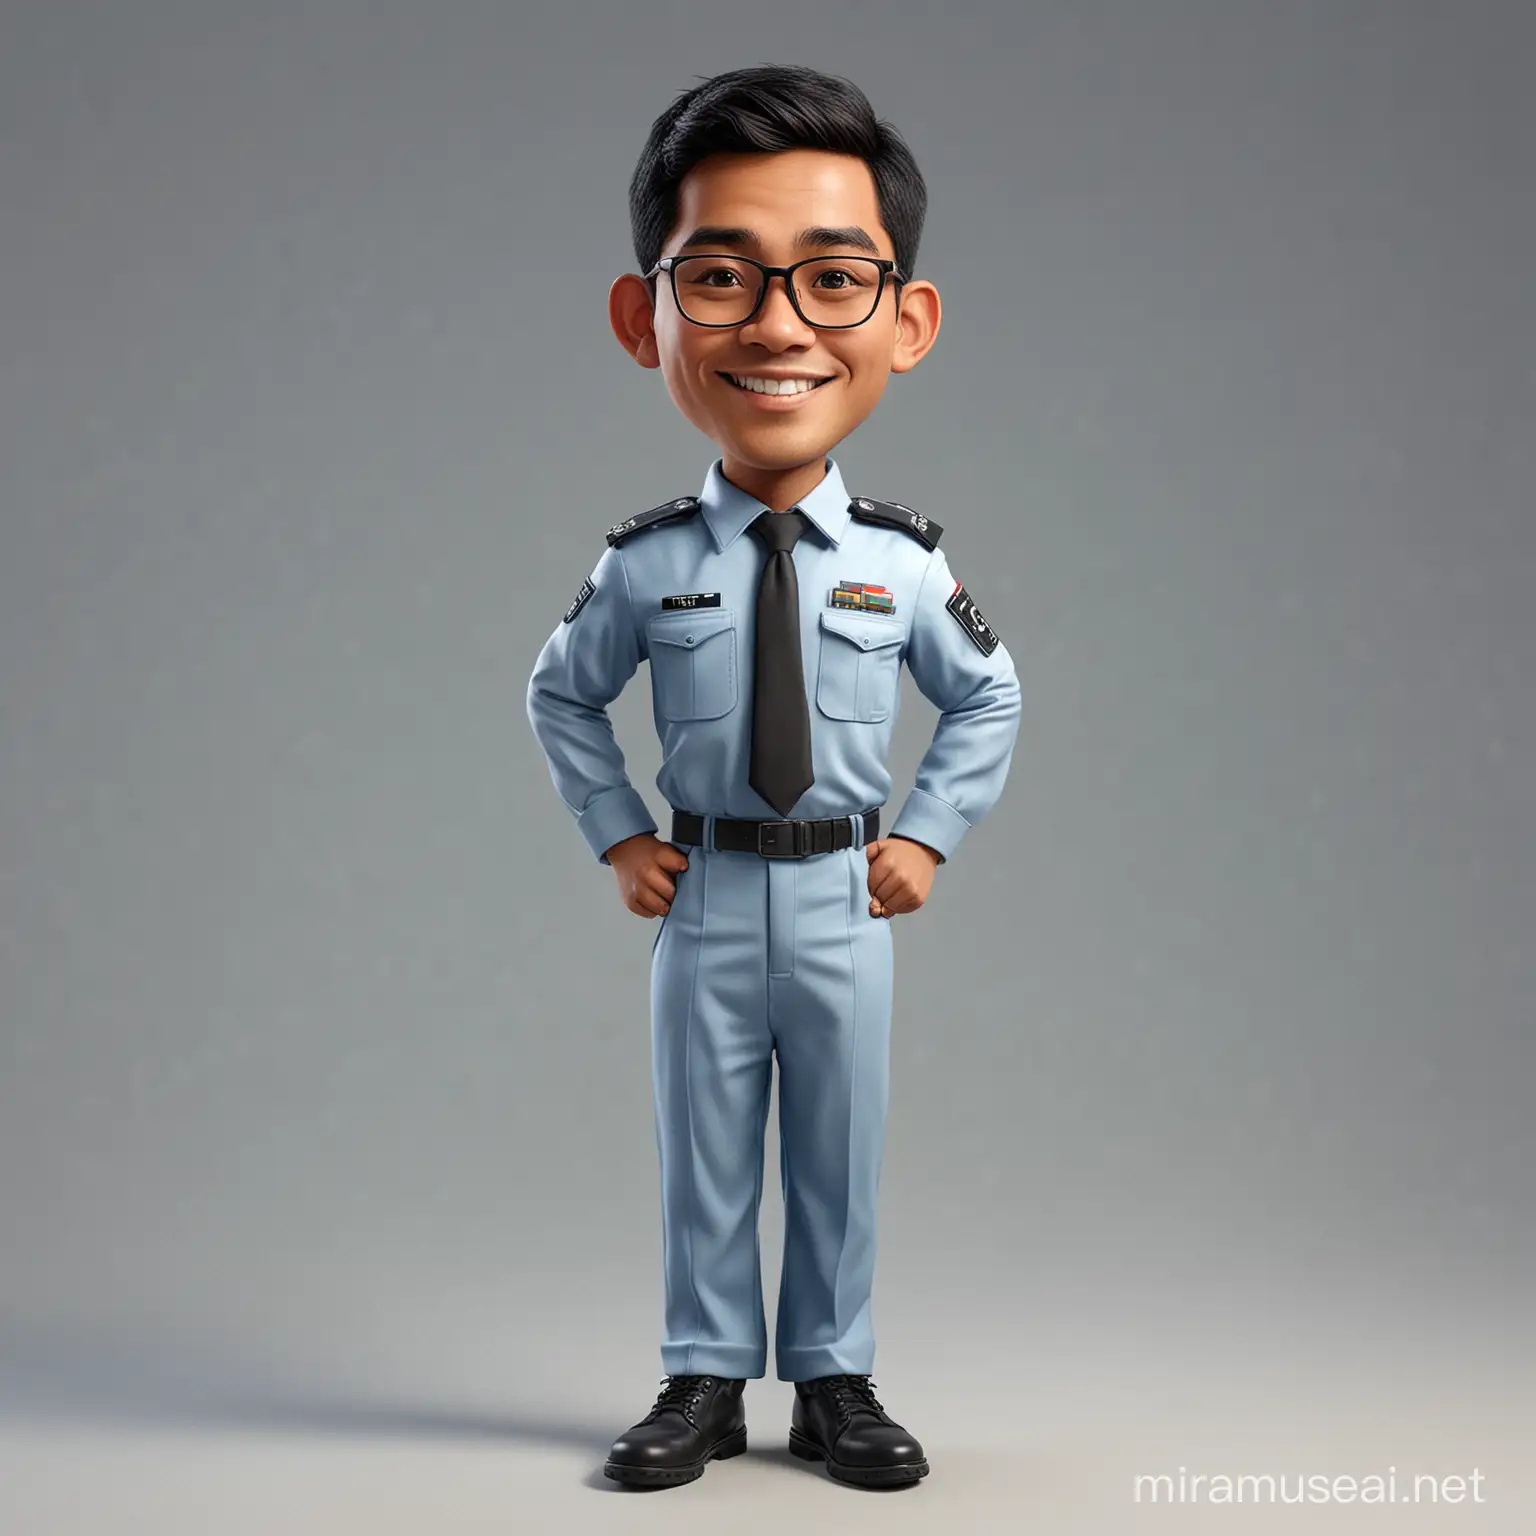 caricature potrait full body, A 29 year old Indonesian man, short thin hair, wearing glasses, Dressed neatly in a light blue pilot uniform, black tie, black trousers, front view smiling photo, Position your hands respectfully on your forehead, realistic.